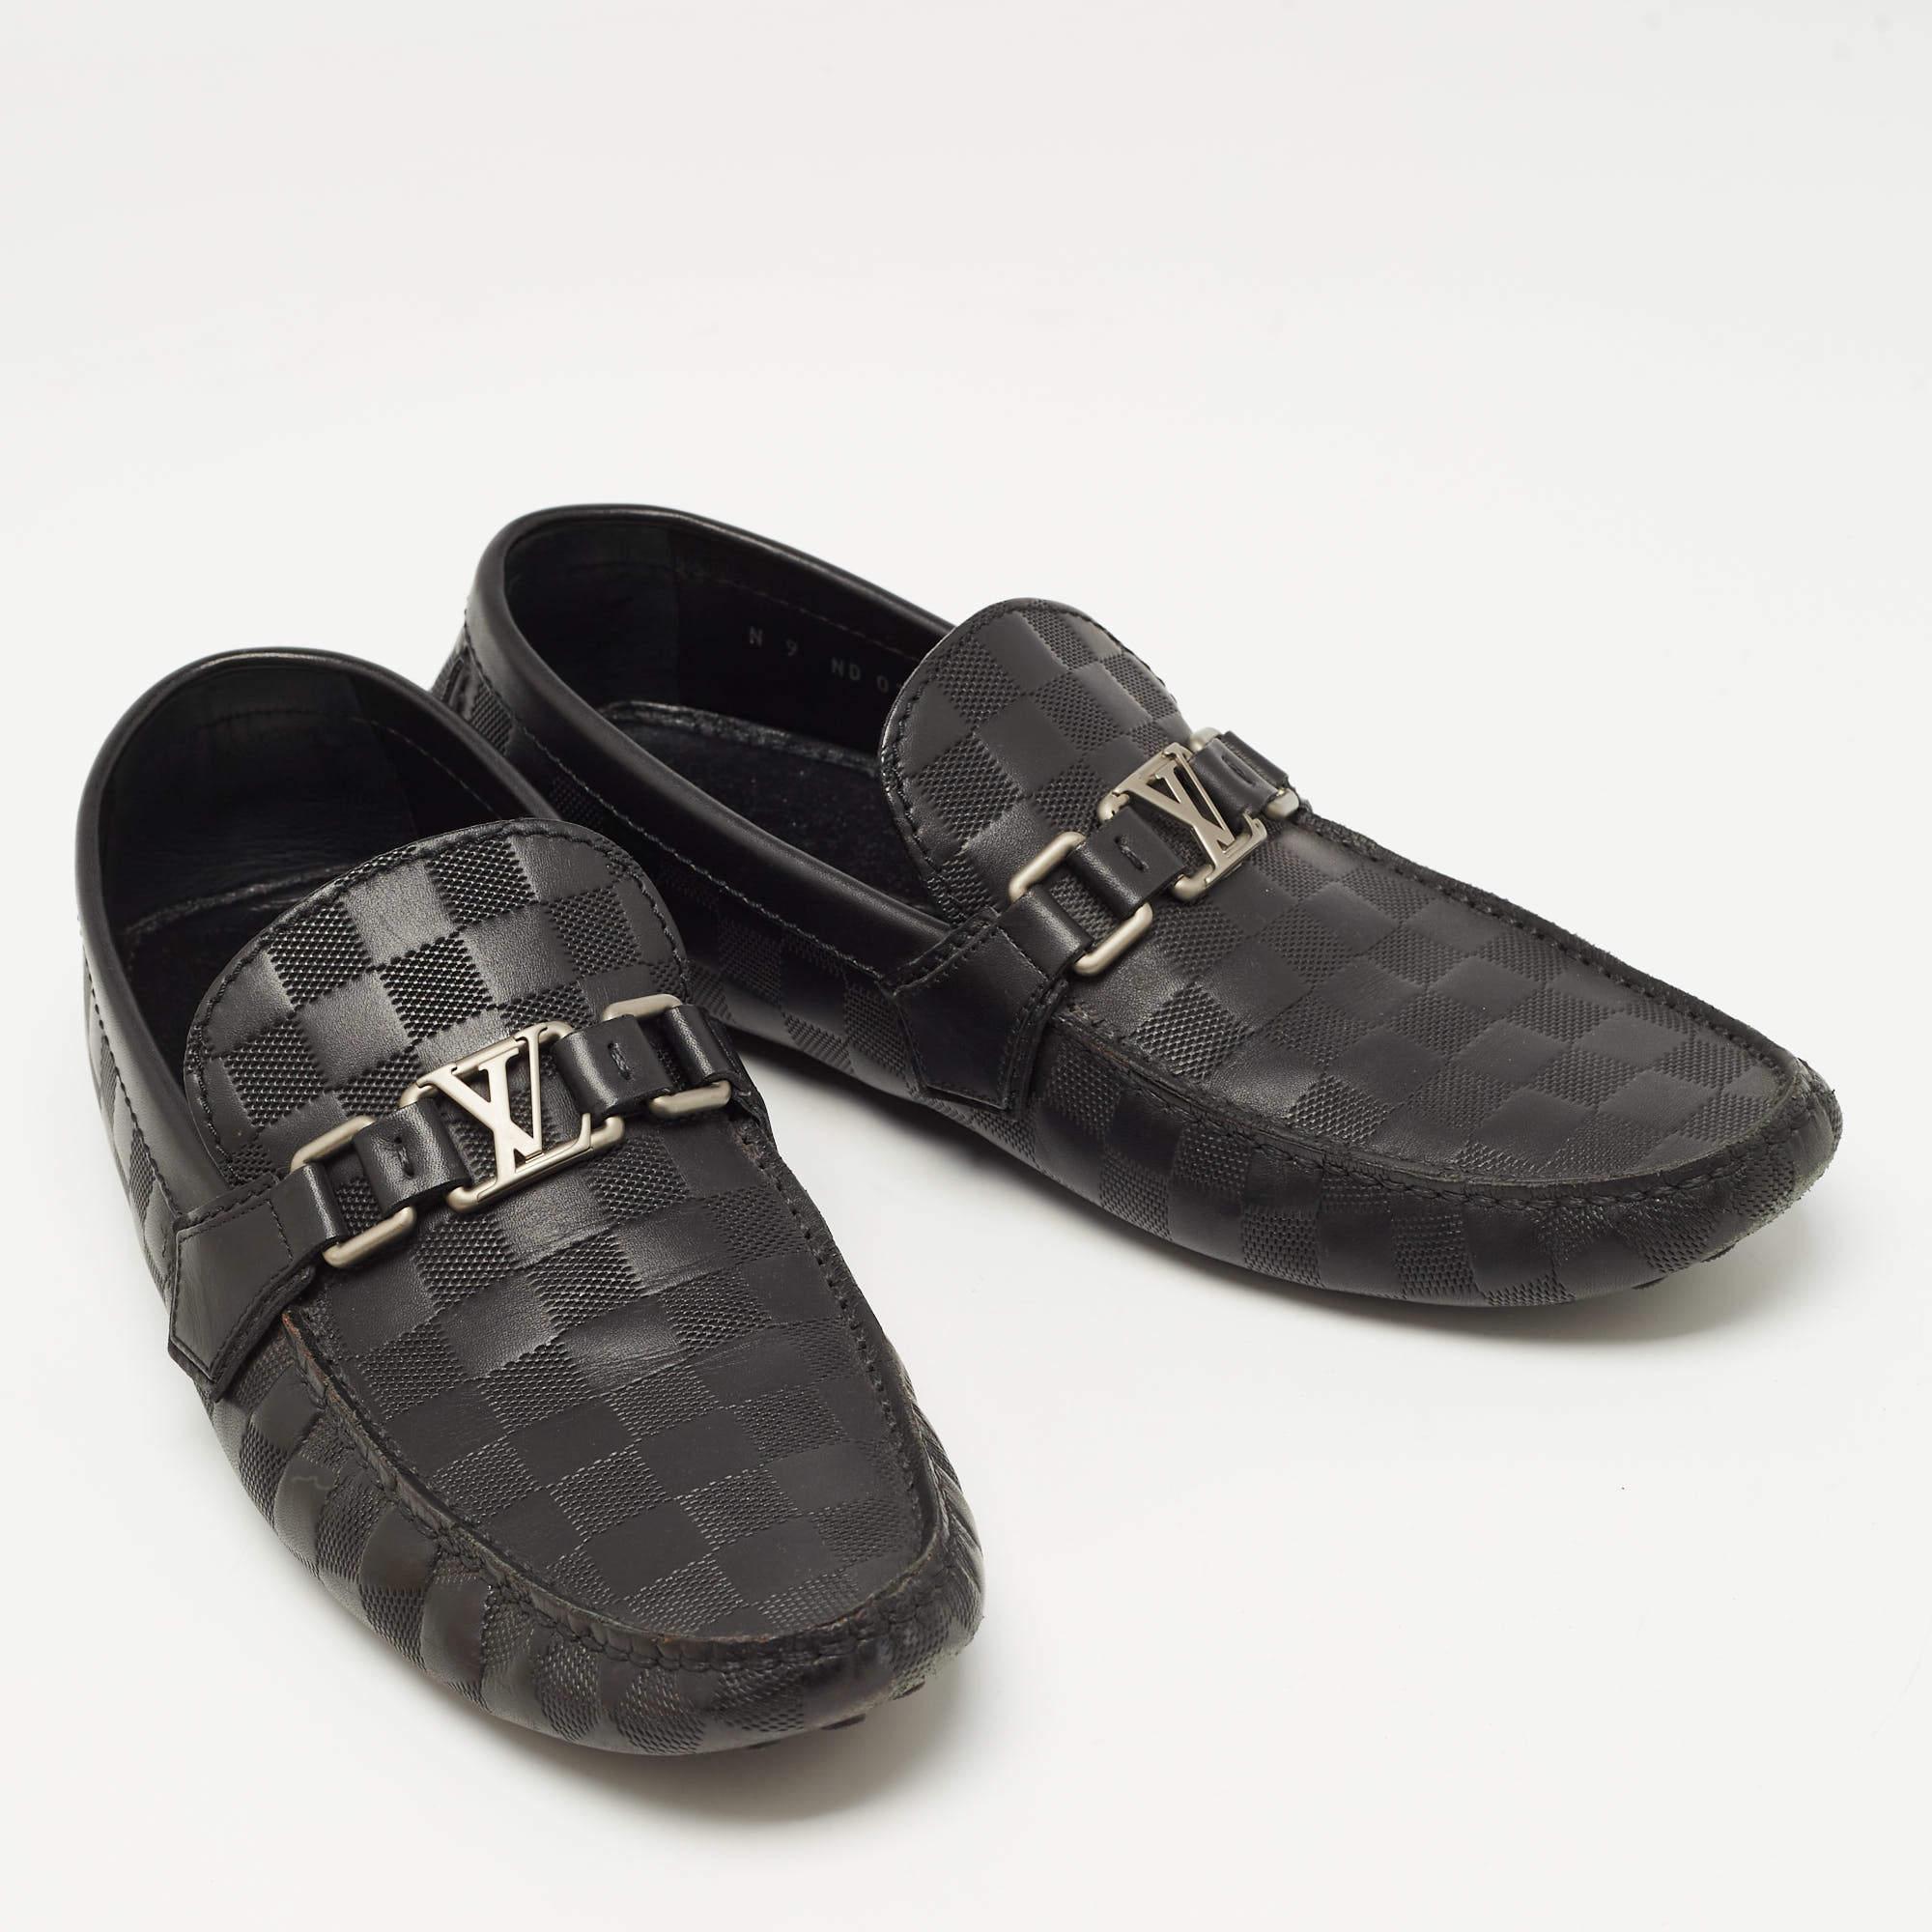 Louis Vuitton Black Damier Embossed Leather Hockenheim Loafers Size 43 3